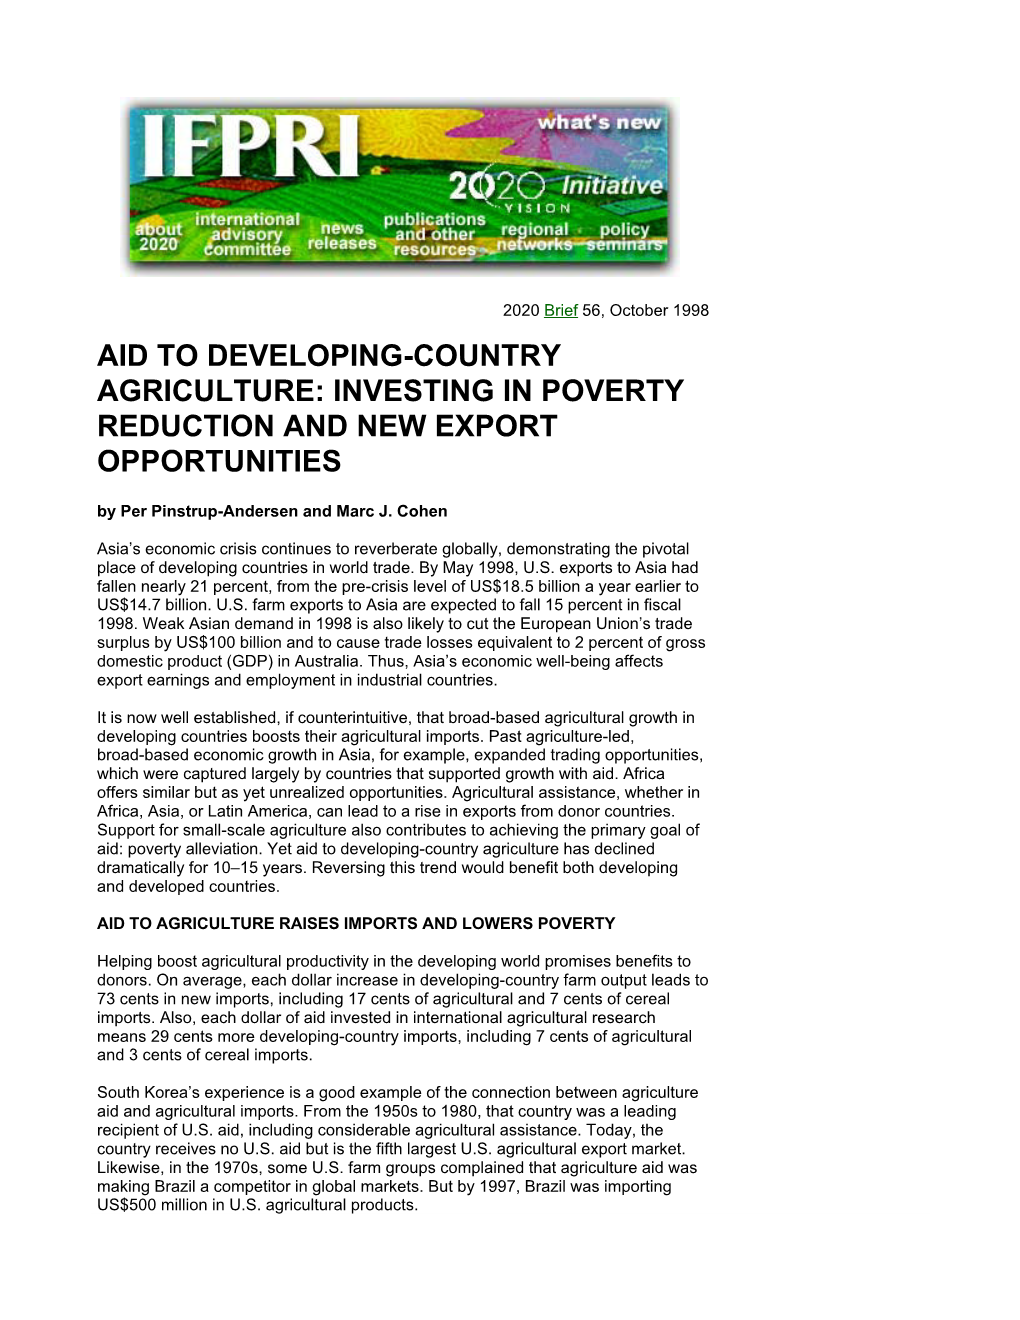 AID to DEVELOPING-COUNTRY AGRICULTURE: INVESTING in POVERTY REDUCTION and NEW EXPORT OPPORTUNITIES by Per Pinstrup-Andersen and Marc J